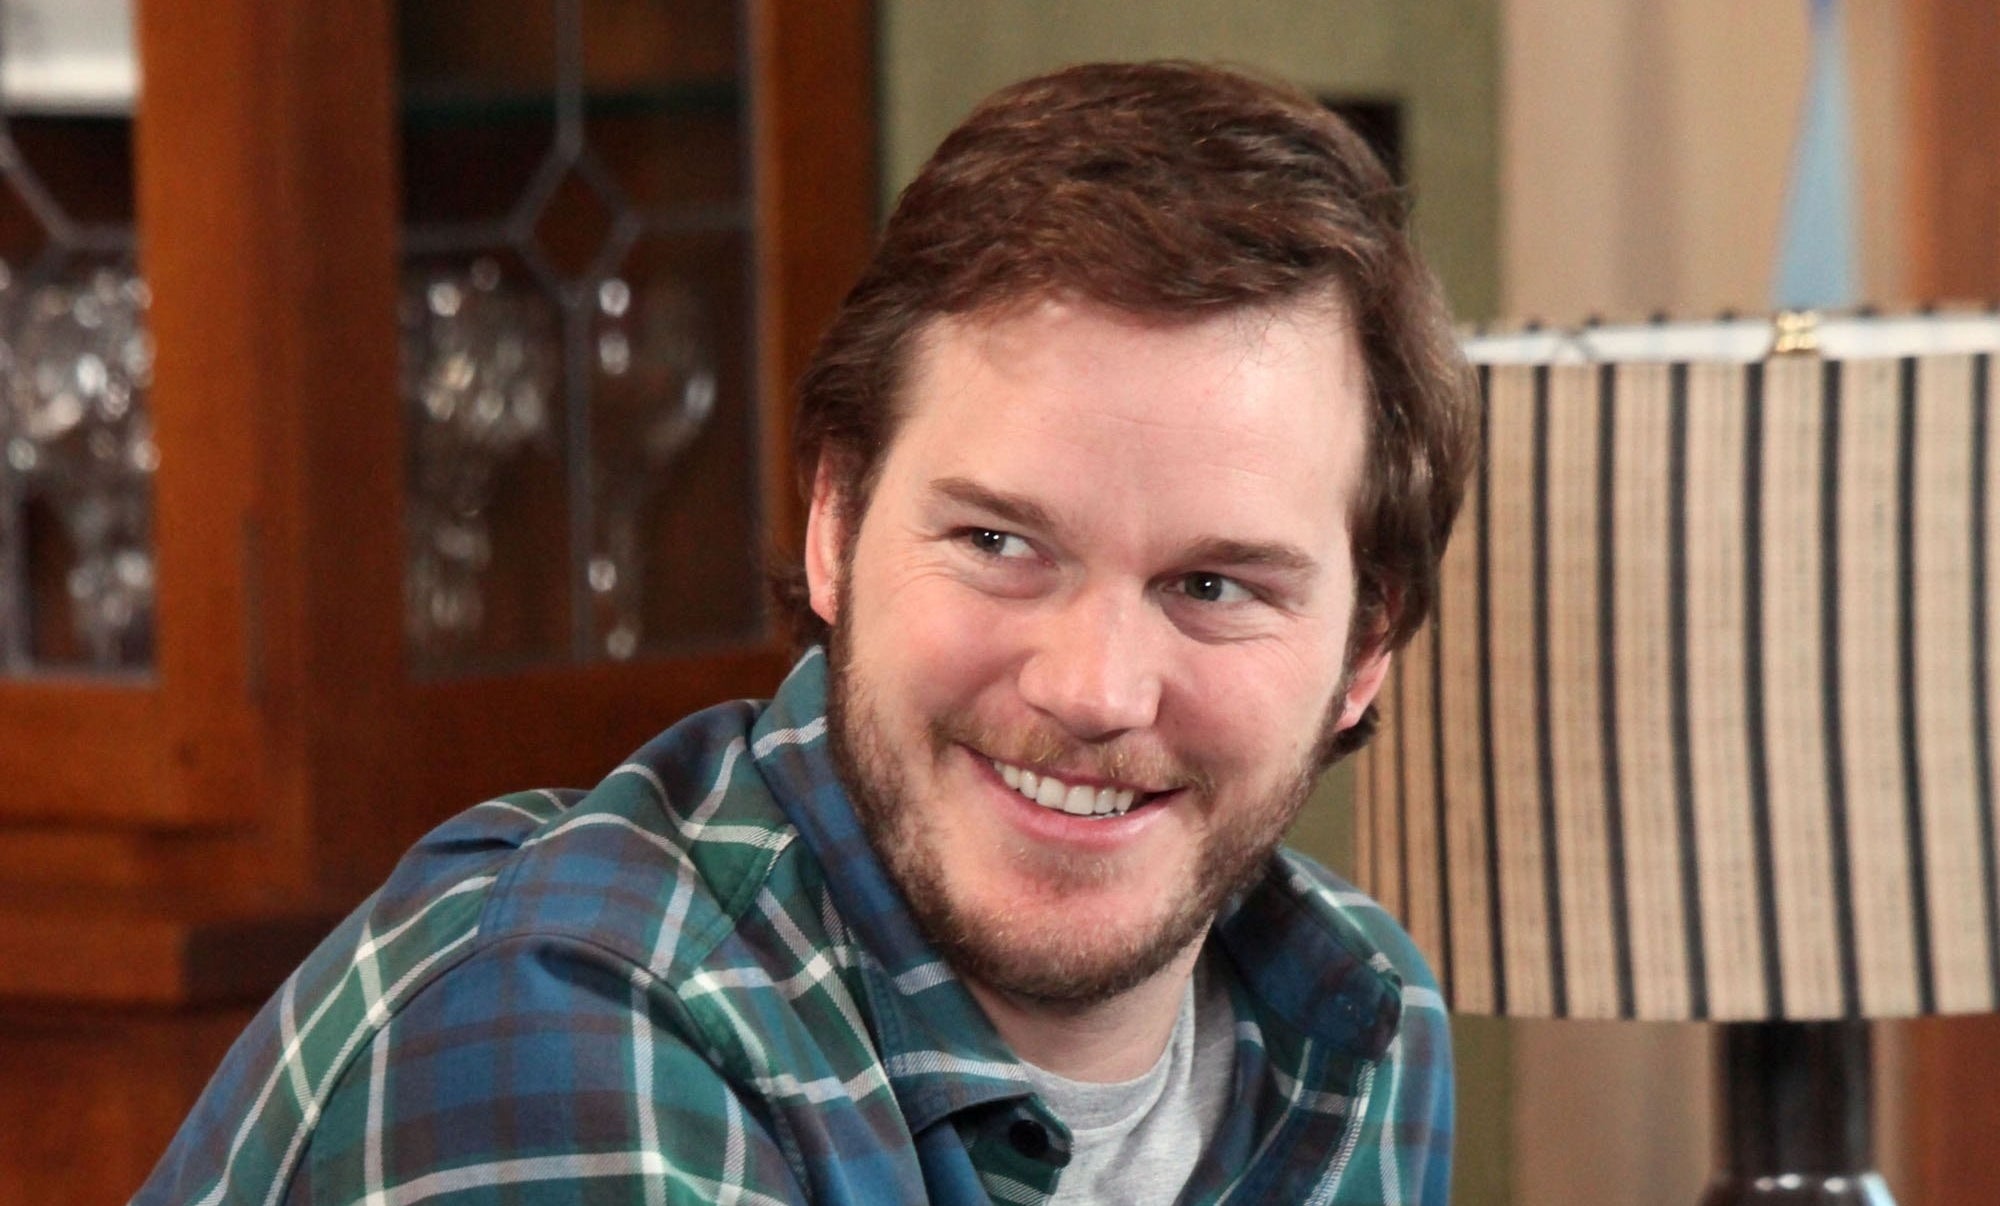 Andy smiling in a green plaid shirt in &quot;Parks and Recreation&quot;